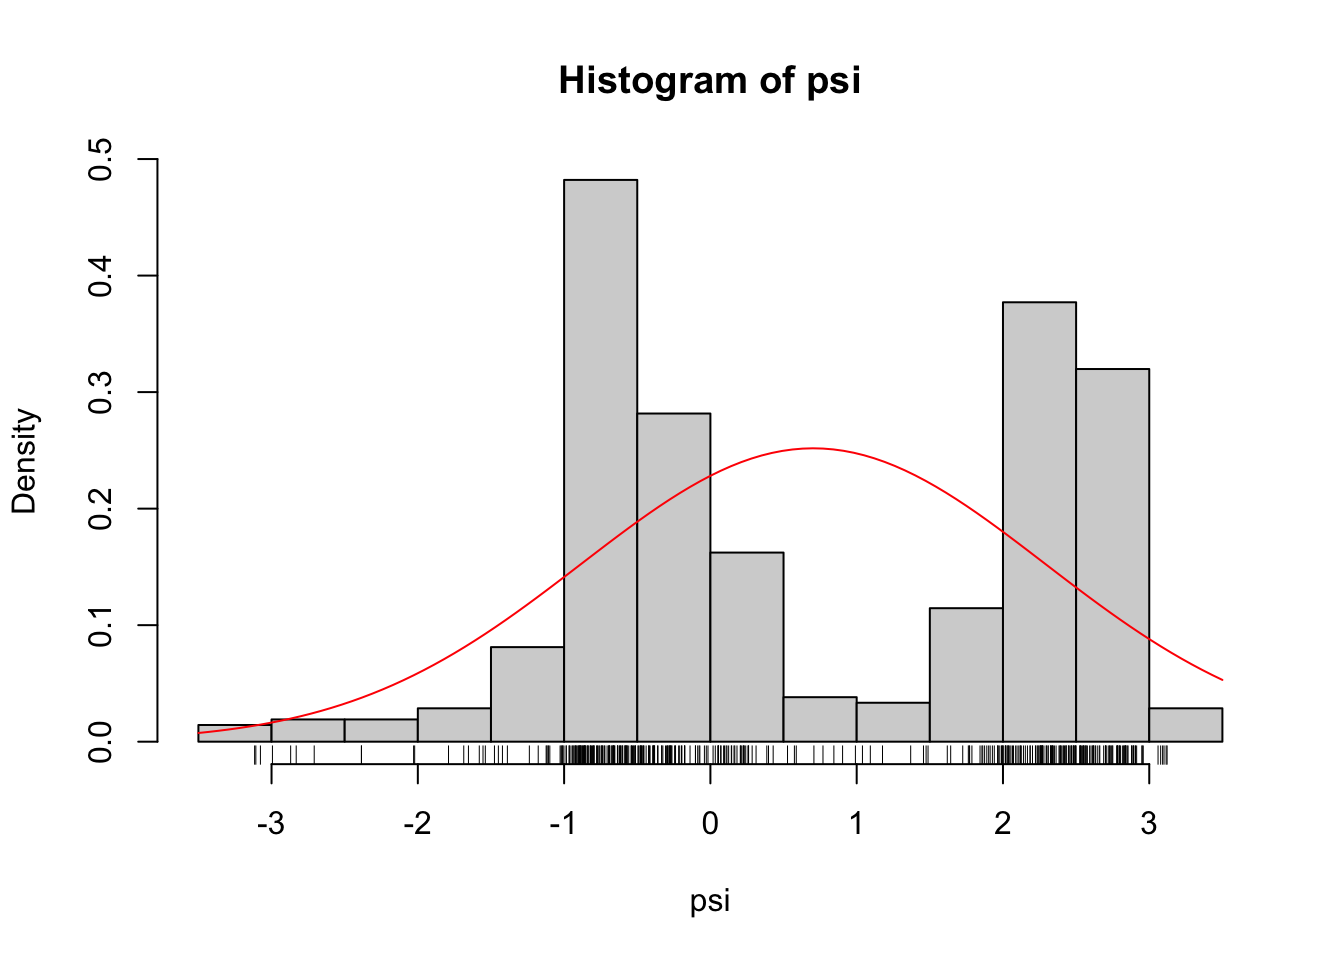 Gaussian density (red) fitted to the $\psi$-angles.